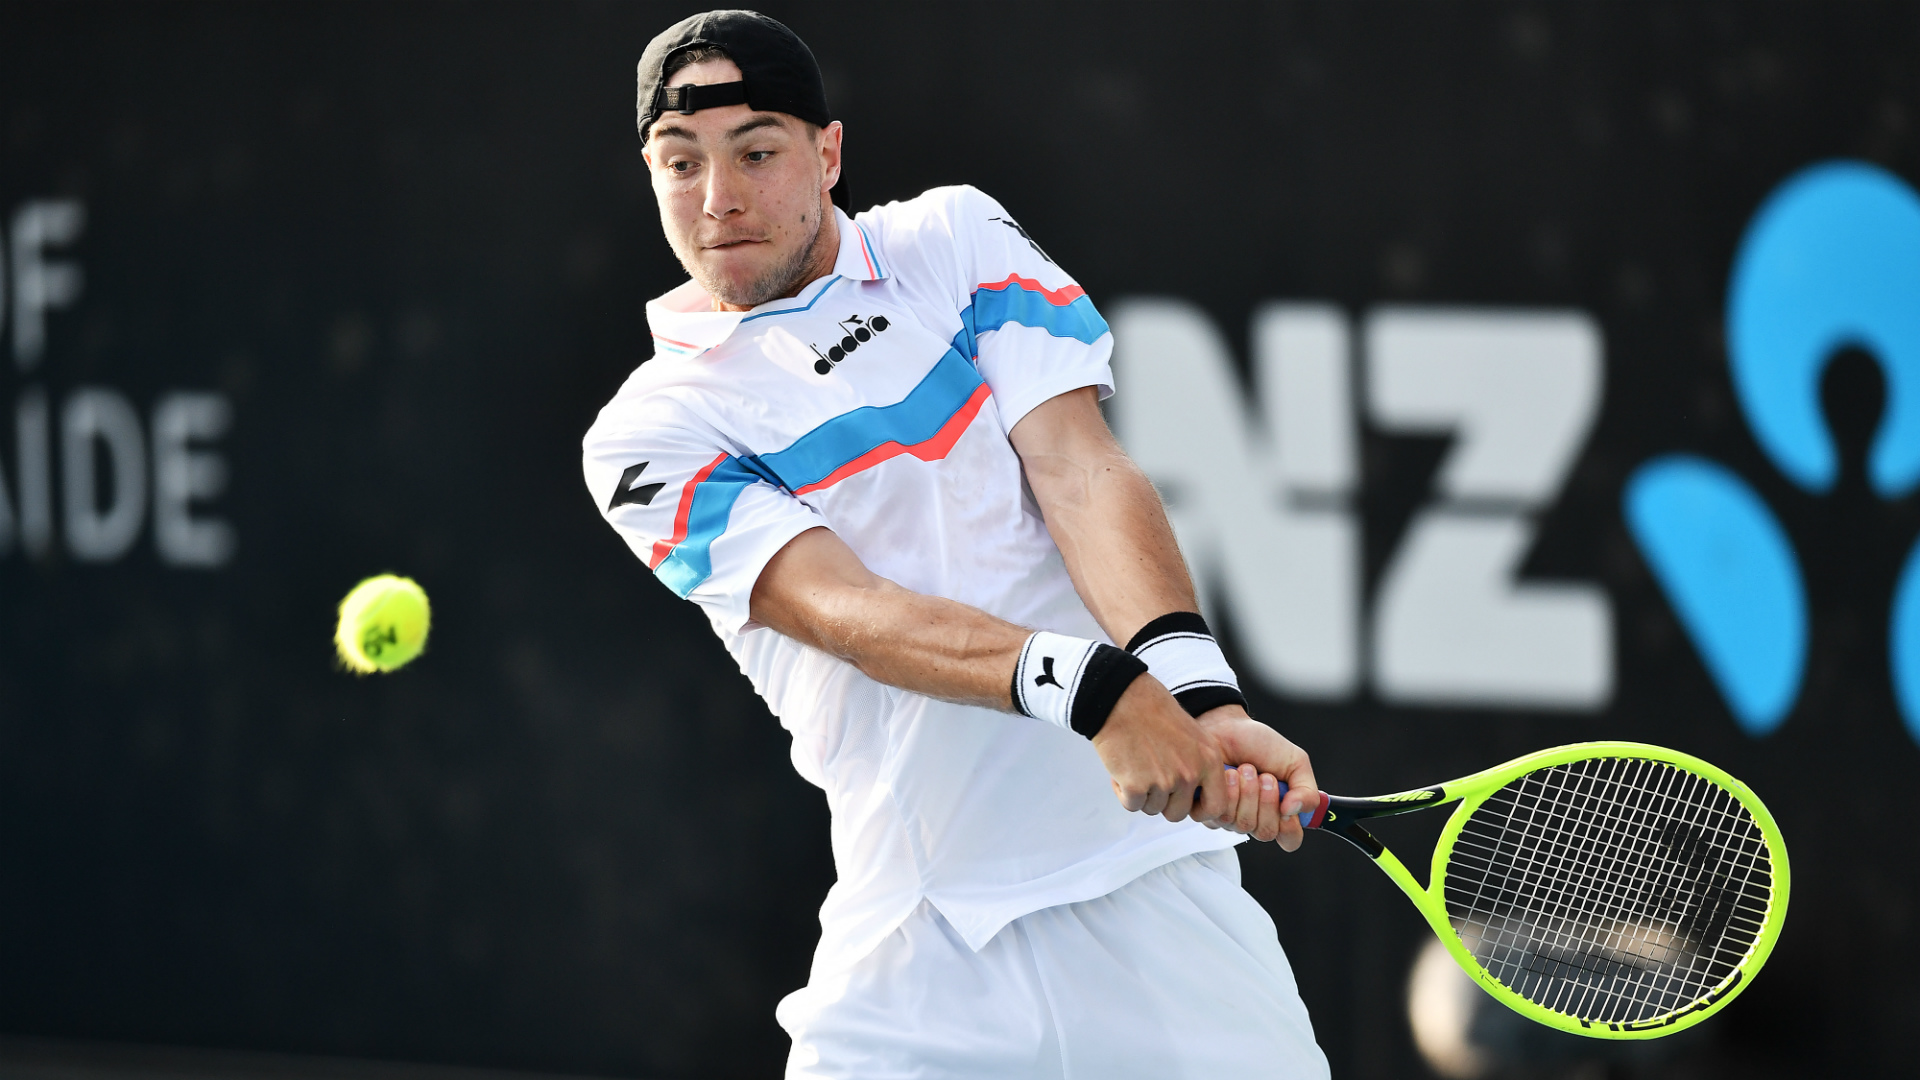 Jan-Lennard Struff, the world number 37, was the most high-profile winner at the Adelaide International on Tuesday.